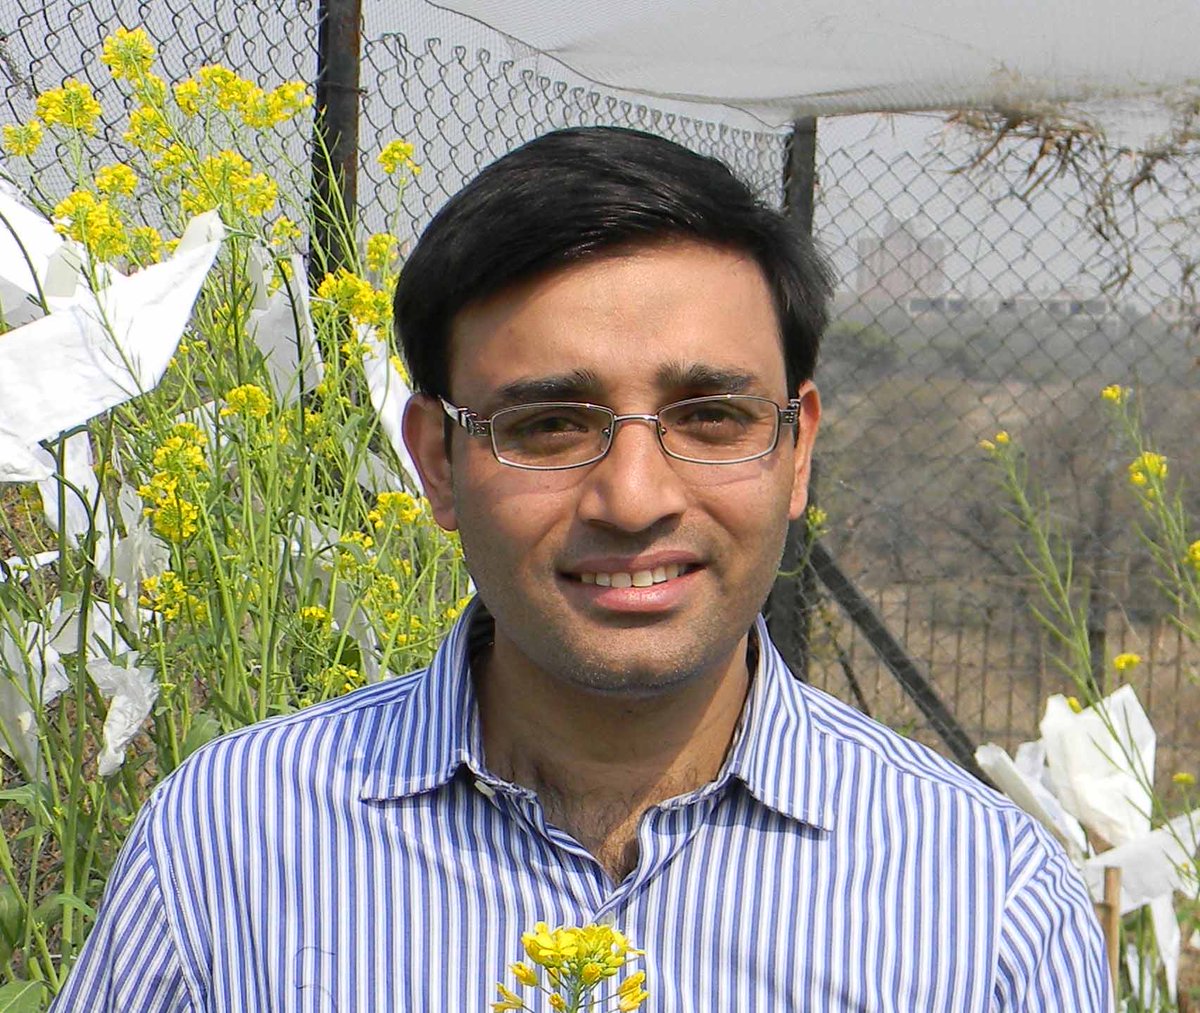 #Congratulations. Dr. Naveen C. Bisht (Scientist, NIPGR) has been selected by the @DBTIndia for the TATA Innovation Fellowship for the year 2023-24 in recognition of his outstanding research contributions. @DrJitendraSingh @rajesh_gokhale @ProfSubhraNIPGR @NCBishtNIPGR